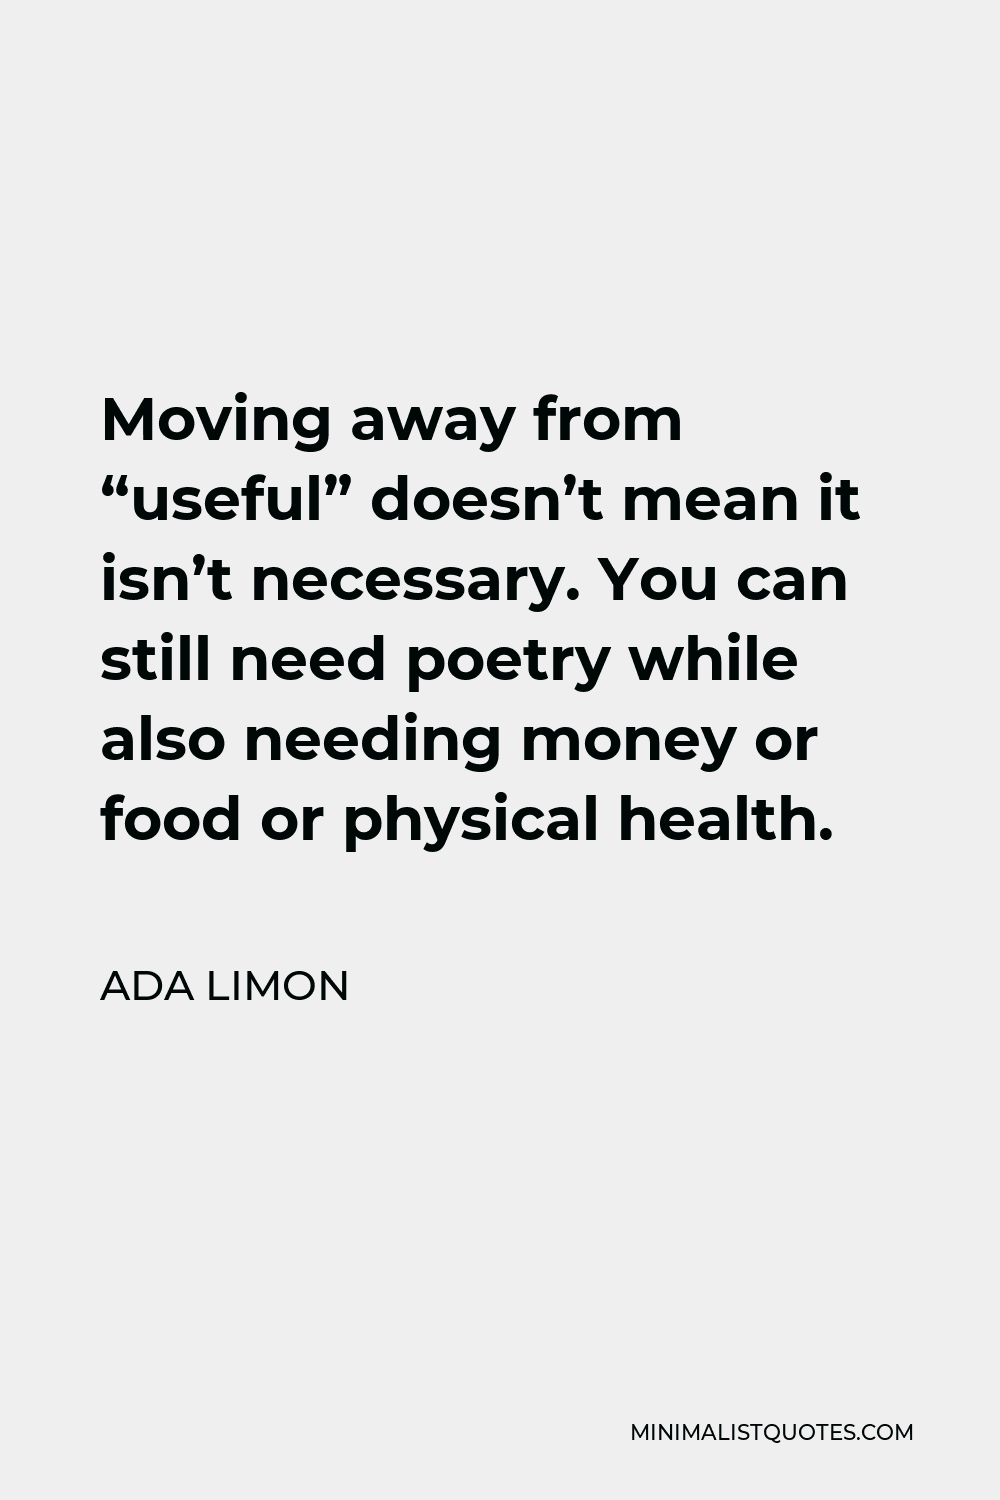 Ada Limon Quote - Moving away from “useful” doesn’t mean it isn’t necessary. You can still need poetry while also needing money or food or physical health.